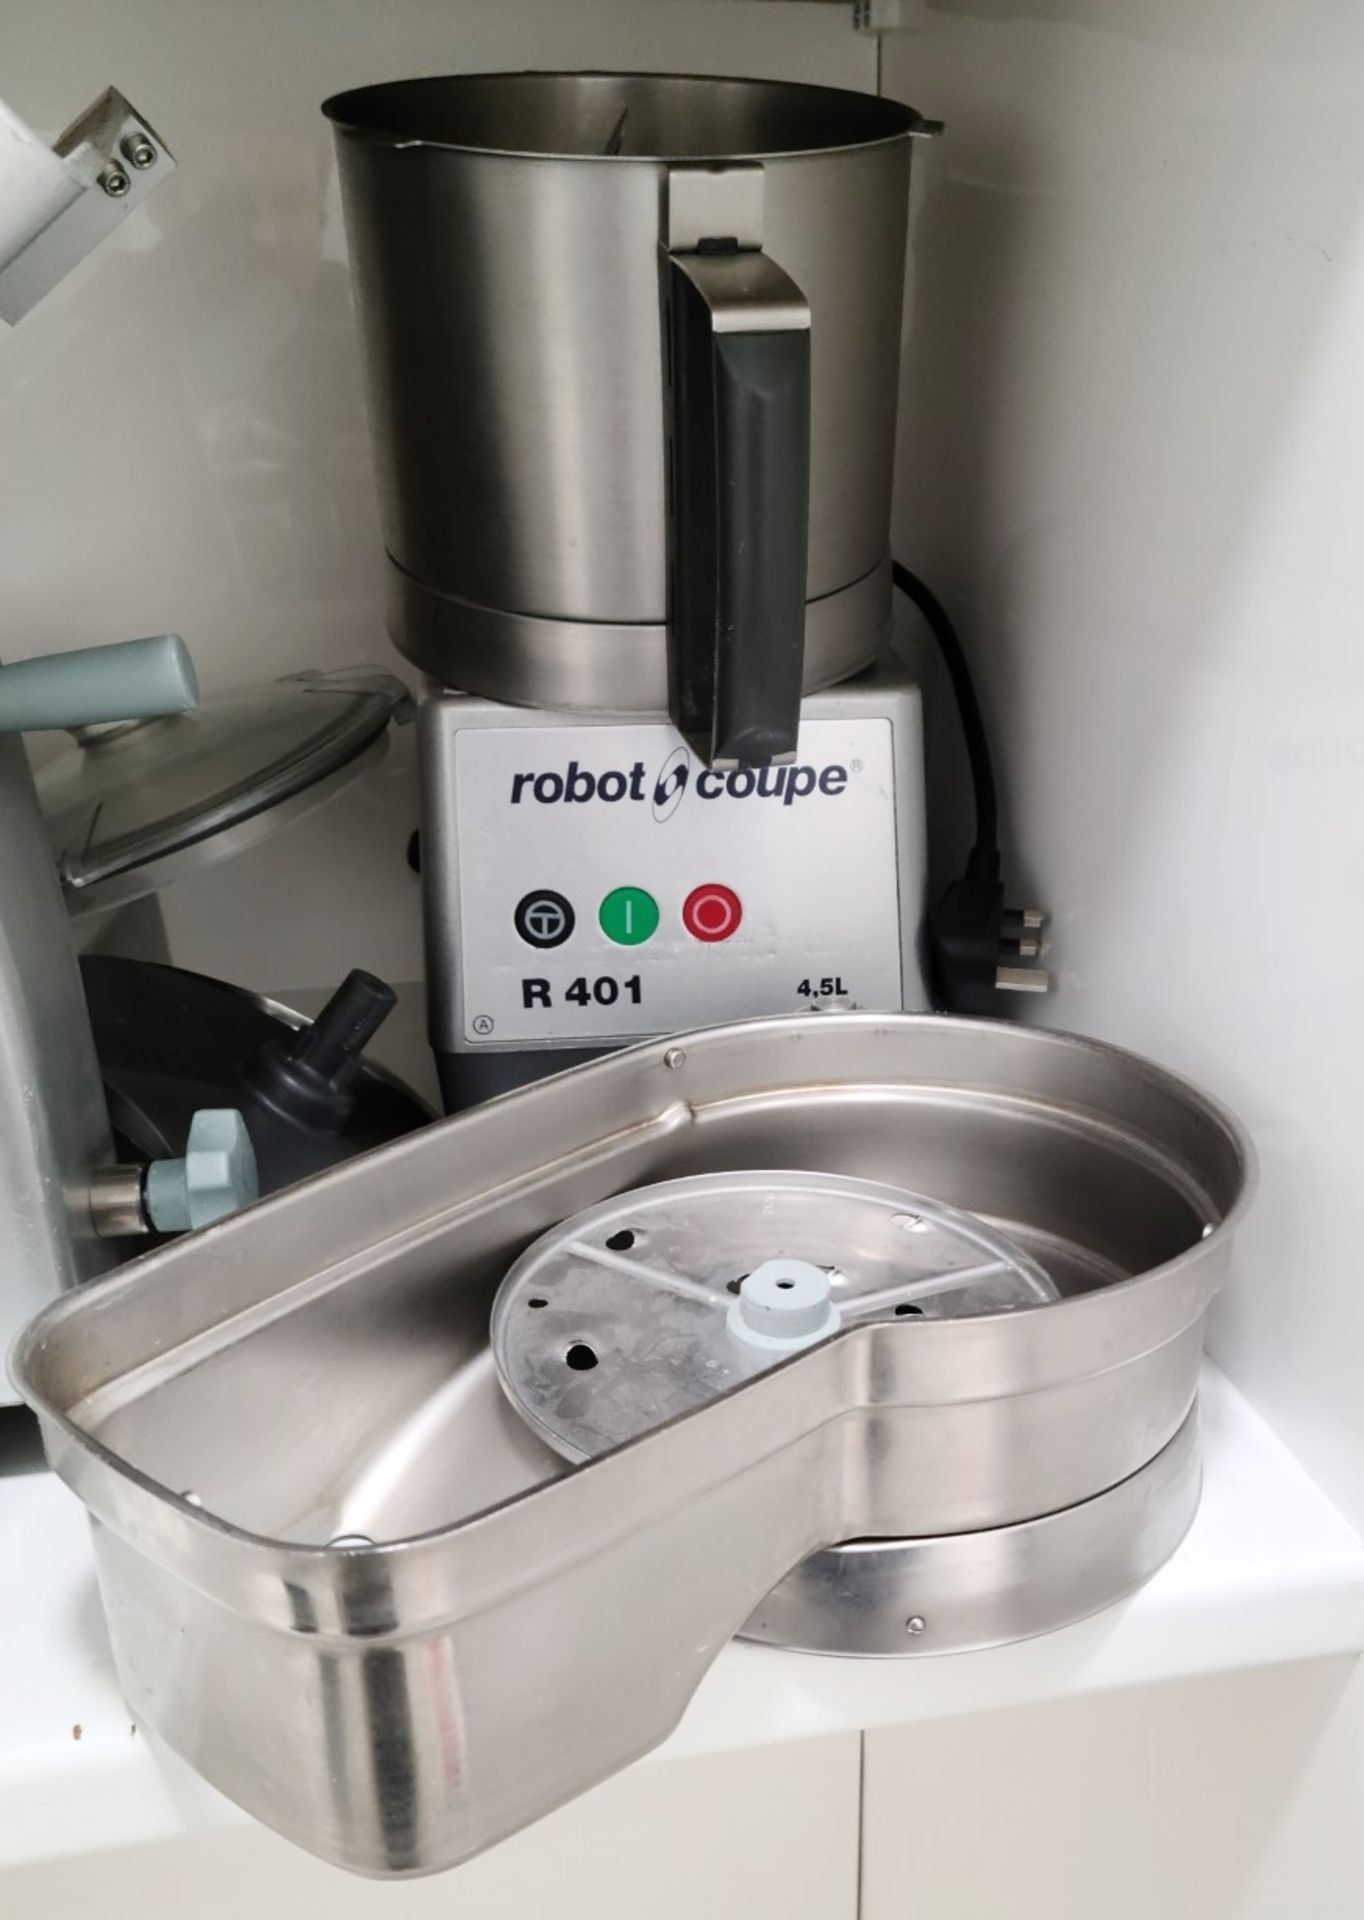 1 x ROBOT COUPE 700W Motor Food Processor With A Vegetable Food Prep Attachment 4.5L Capacity R401 - Image 2 of 6